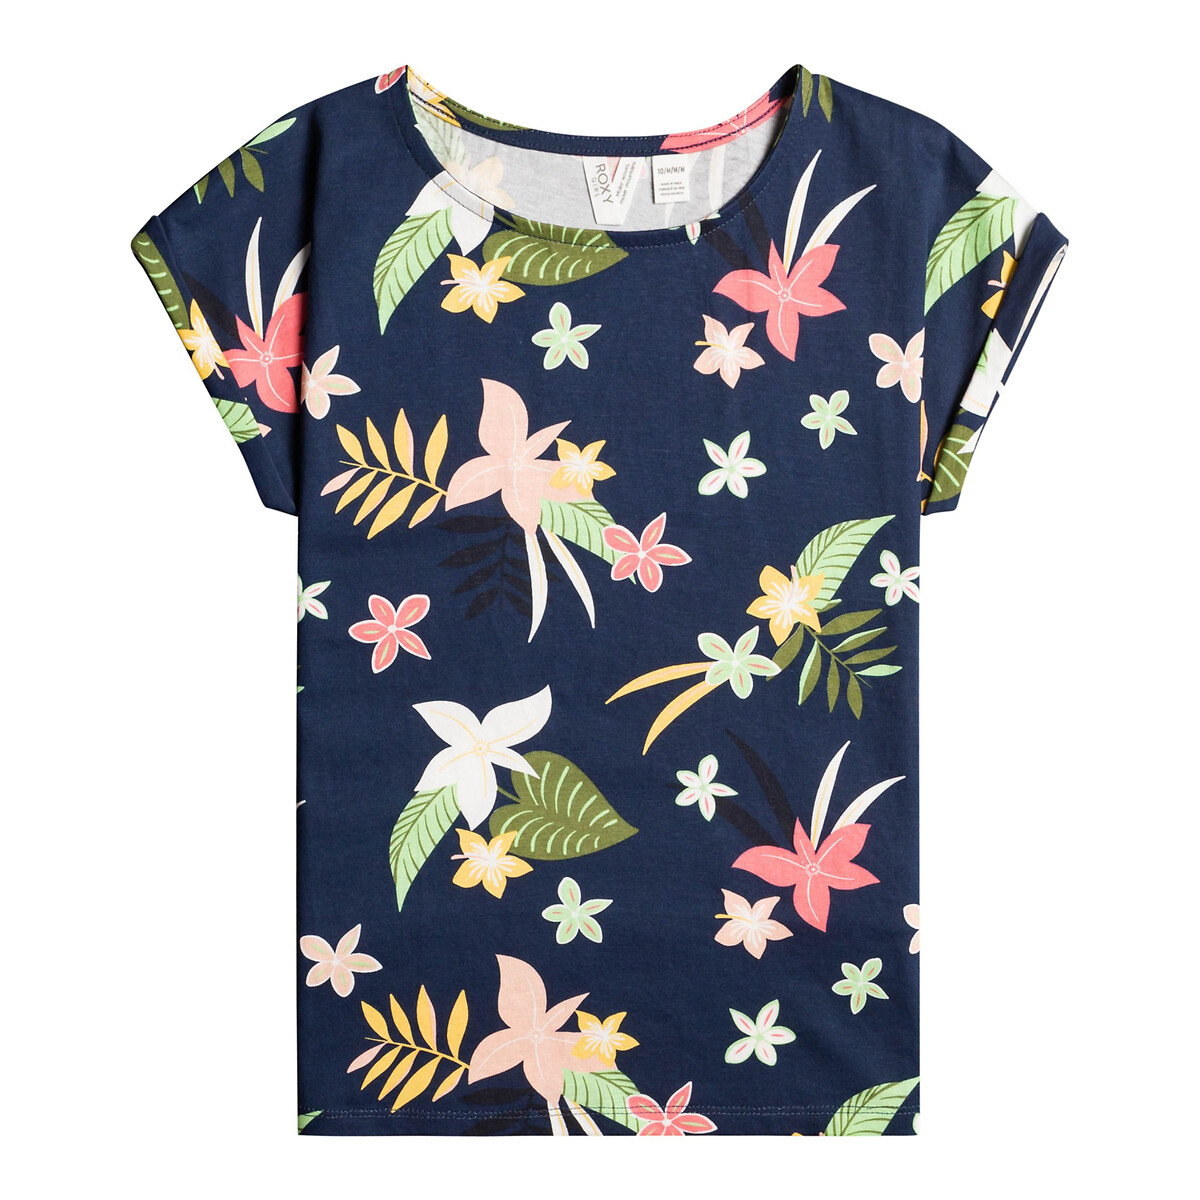 Floral Print Cotton T-Shirt with Short Sleeves